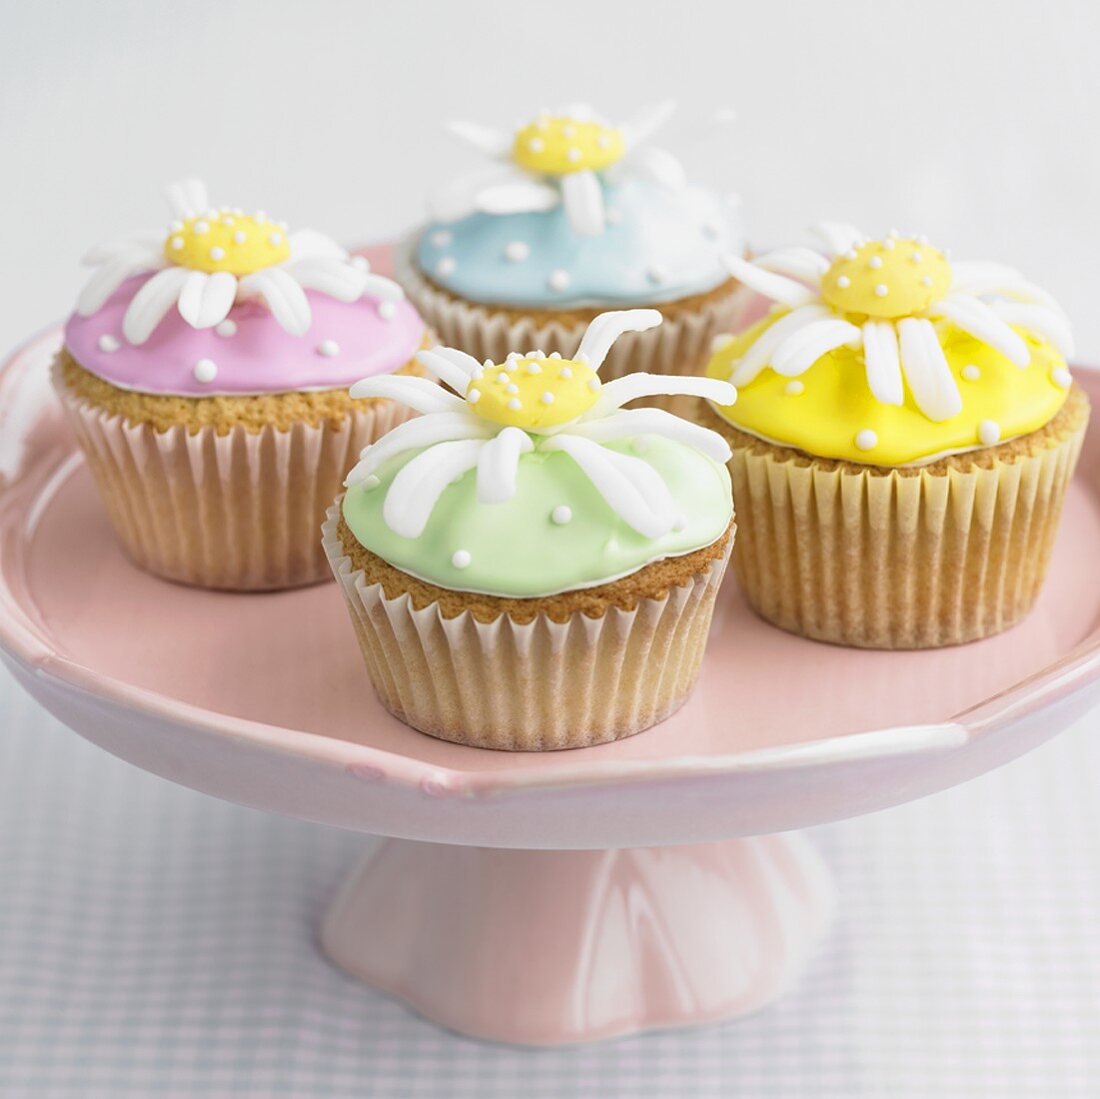 Four cupcakes with daisy decorations on a pedestal stand